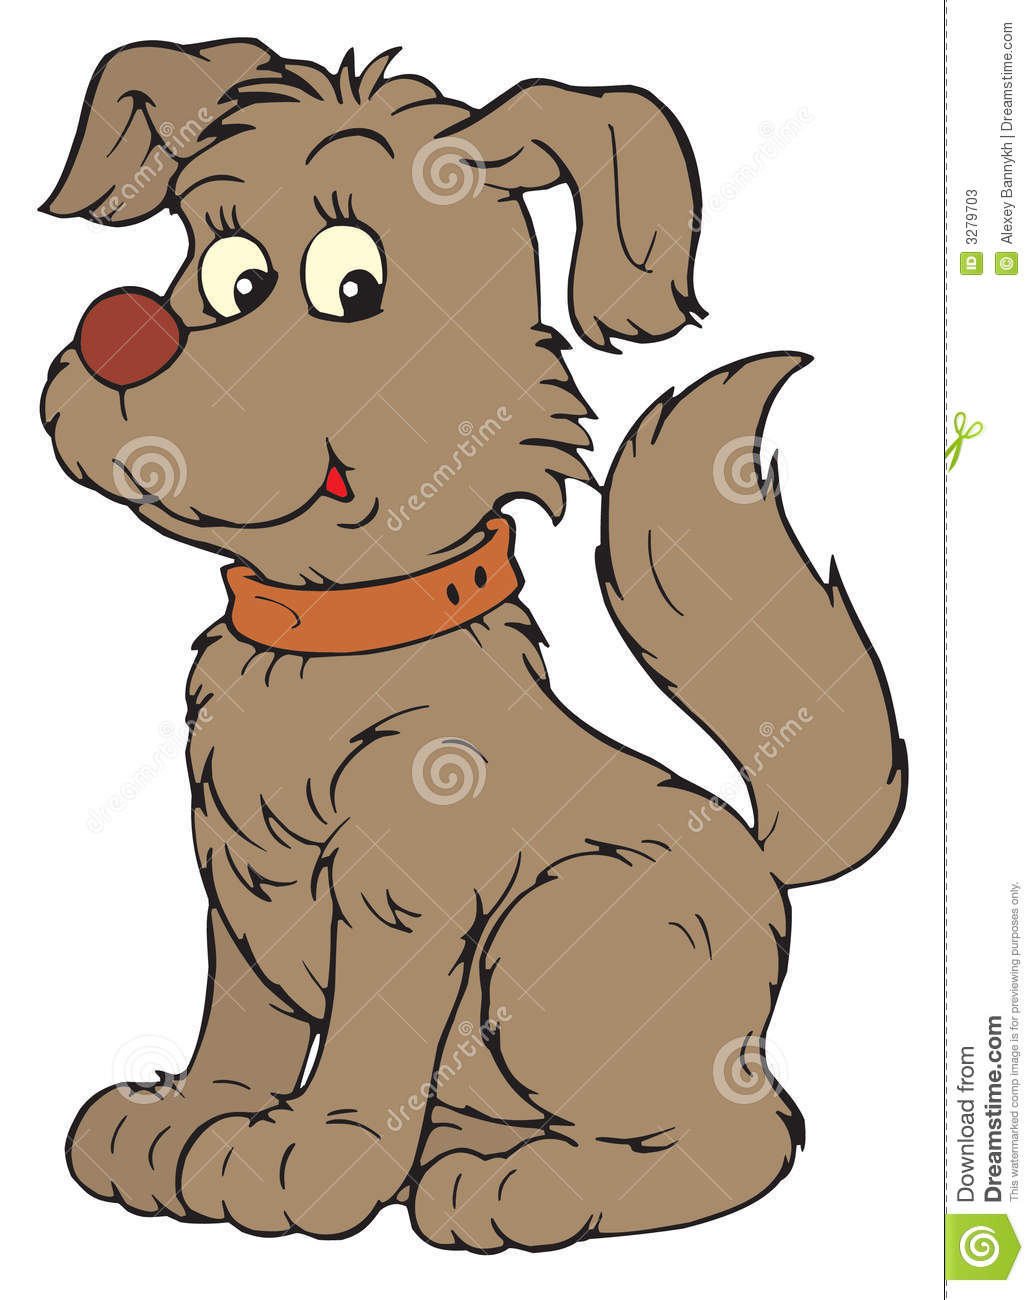 free clipart of a dog - photo #45